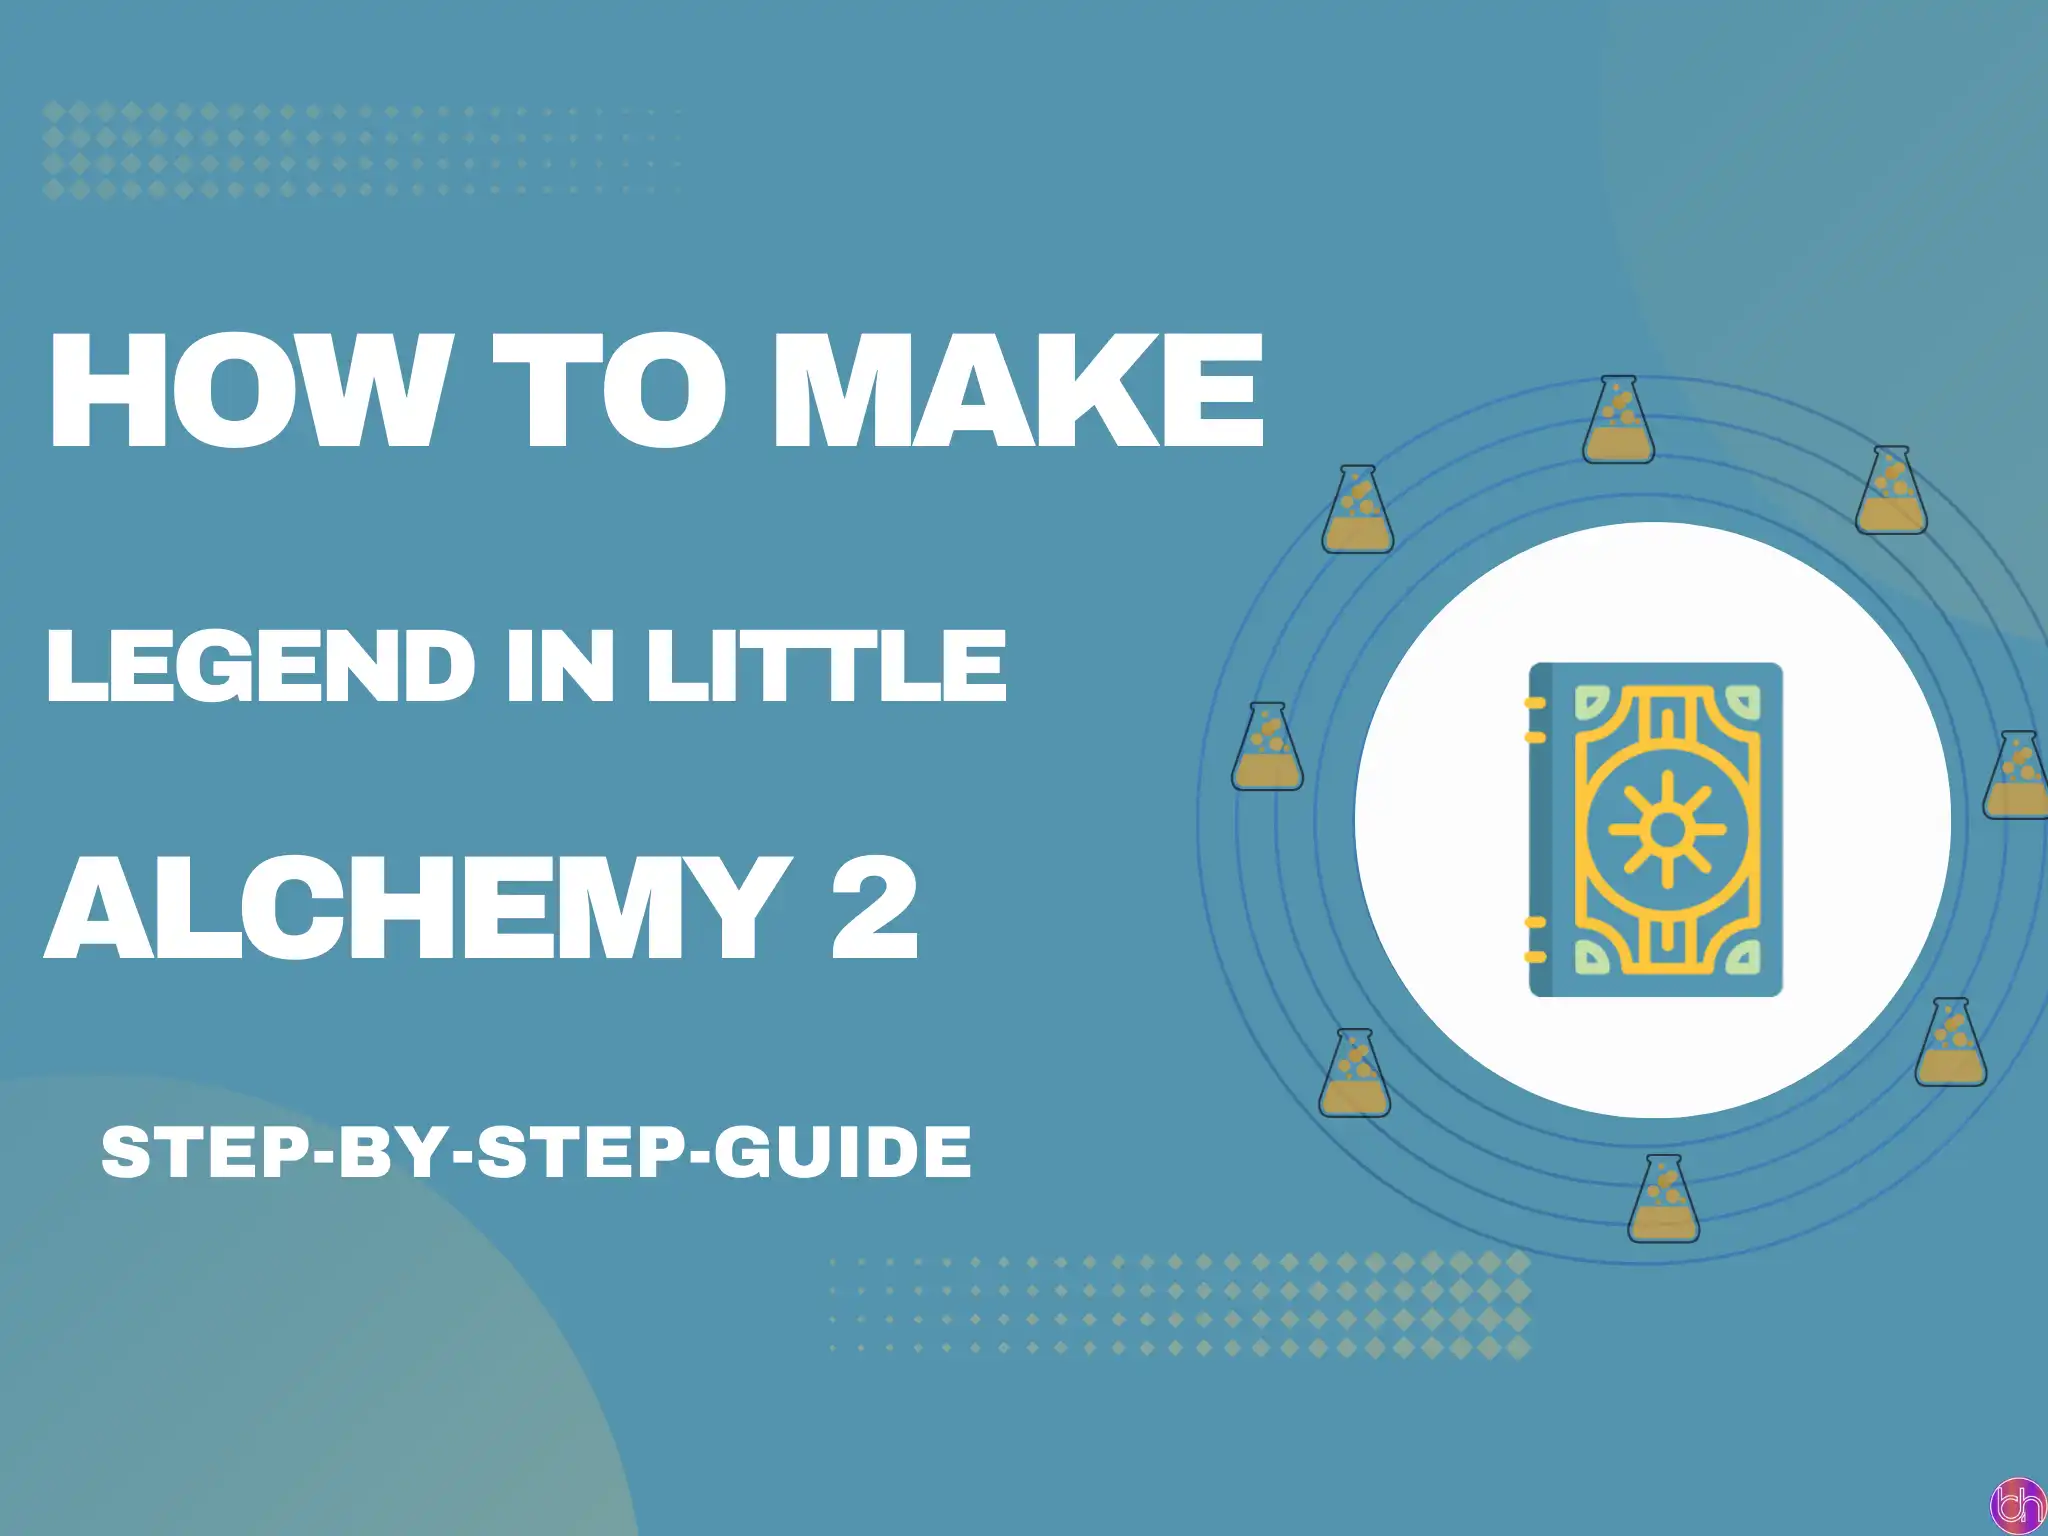 How to make Legend in Little Alchemy 2